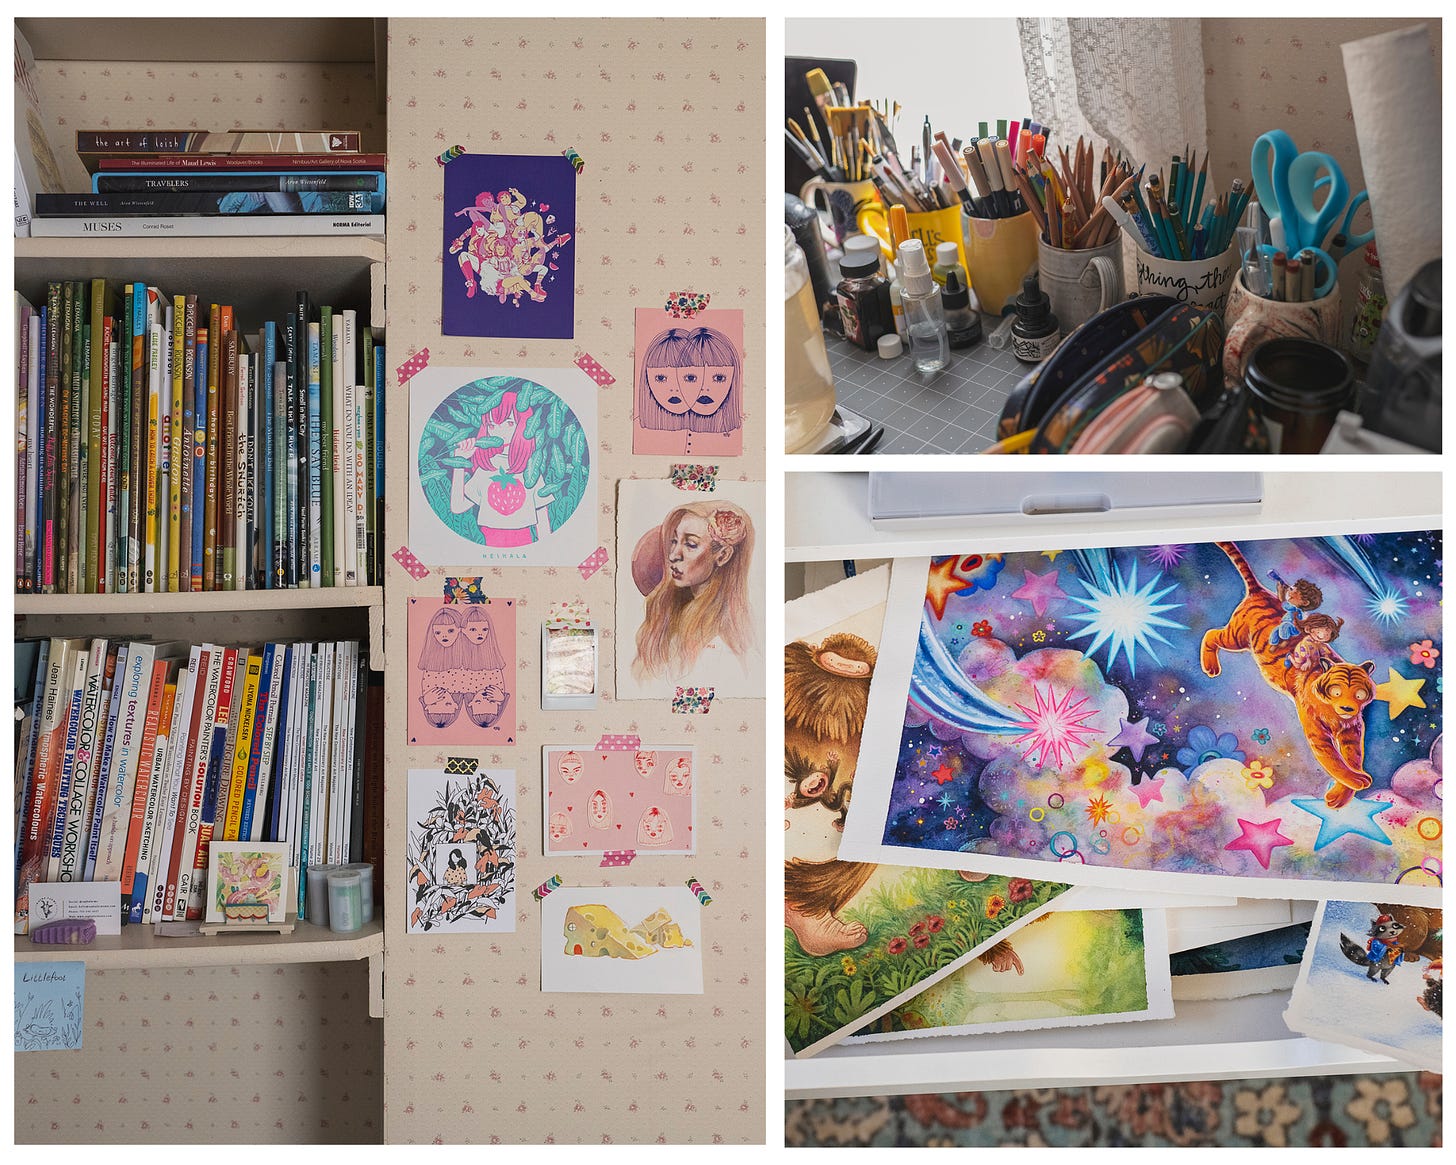 Photo collage of the artist's home studio. Clockwise from left: a photo of shelves lined with picture books and other reference materials. The wall next to it is covered with artwork and inspirational imagery. The top right photo shows a closeup of a desk filled with art materials, including pencils, paint brushes, pens, scissors, etc. Bottom right: an open drawer reveals a few different completed illustrations.